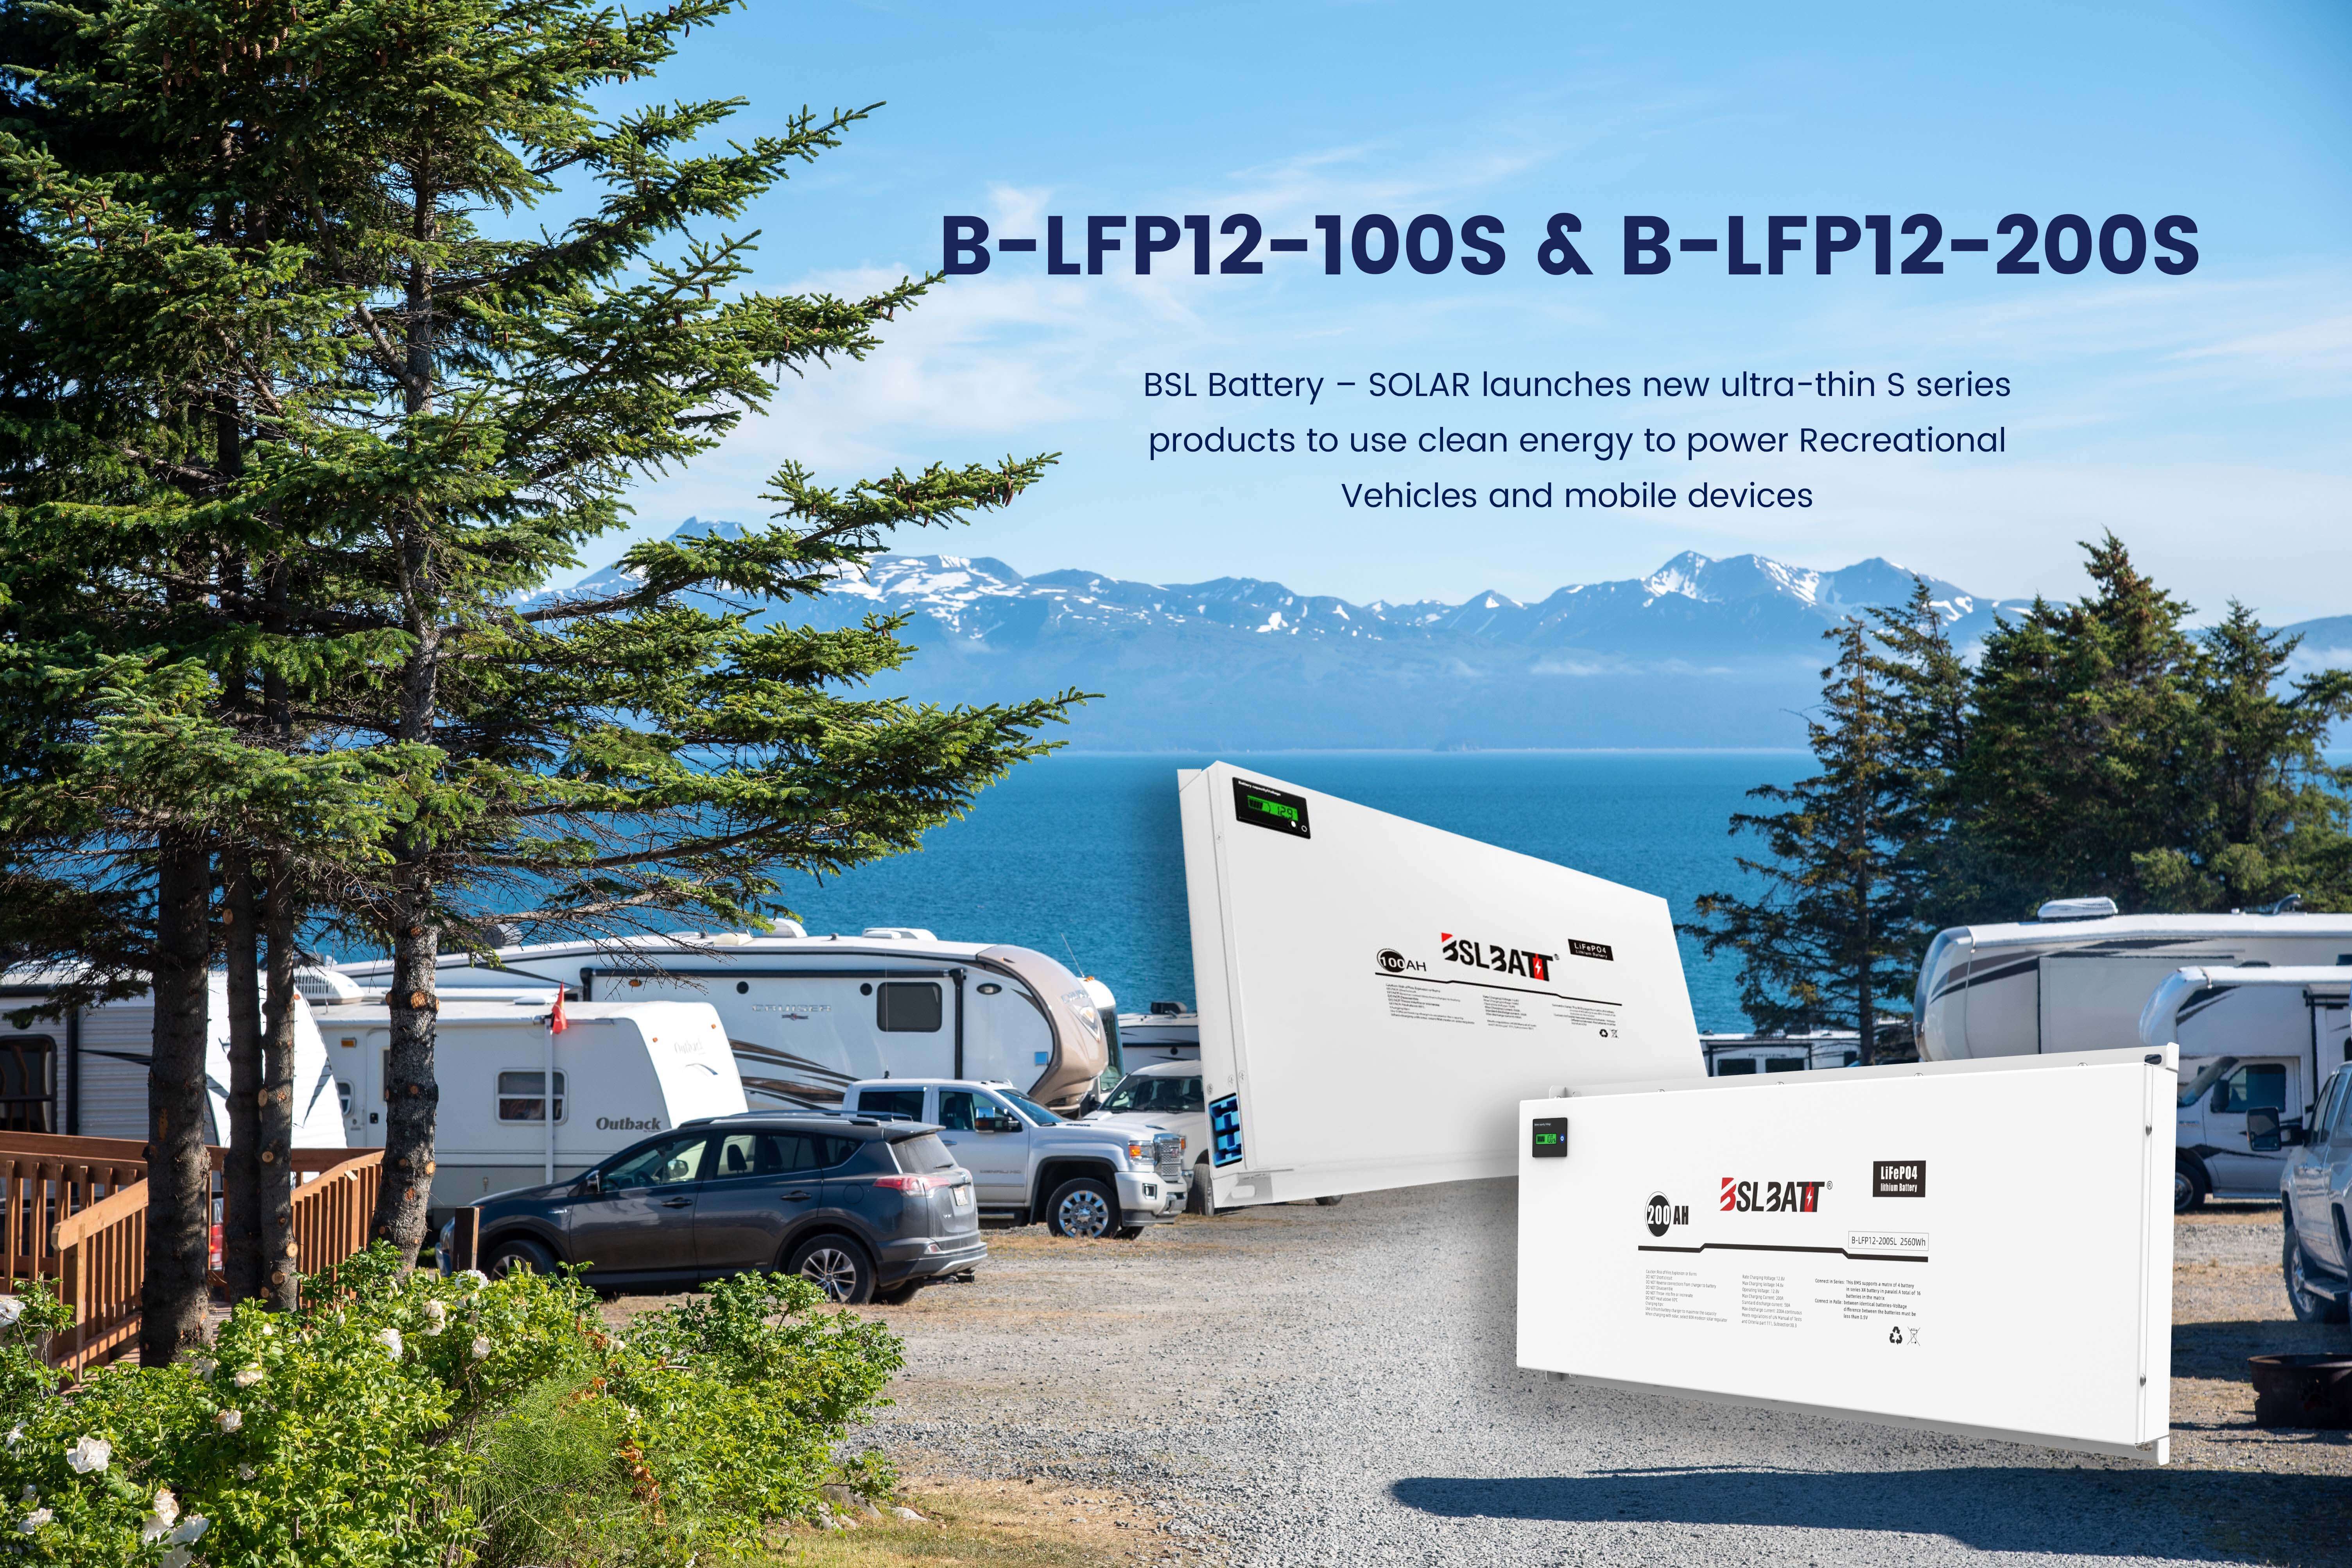 BSL Battery – SOLAR launches new ultra-thin S series products to use clean energy to power Recreational Vehicles and mobile devices